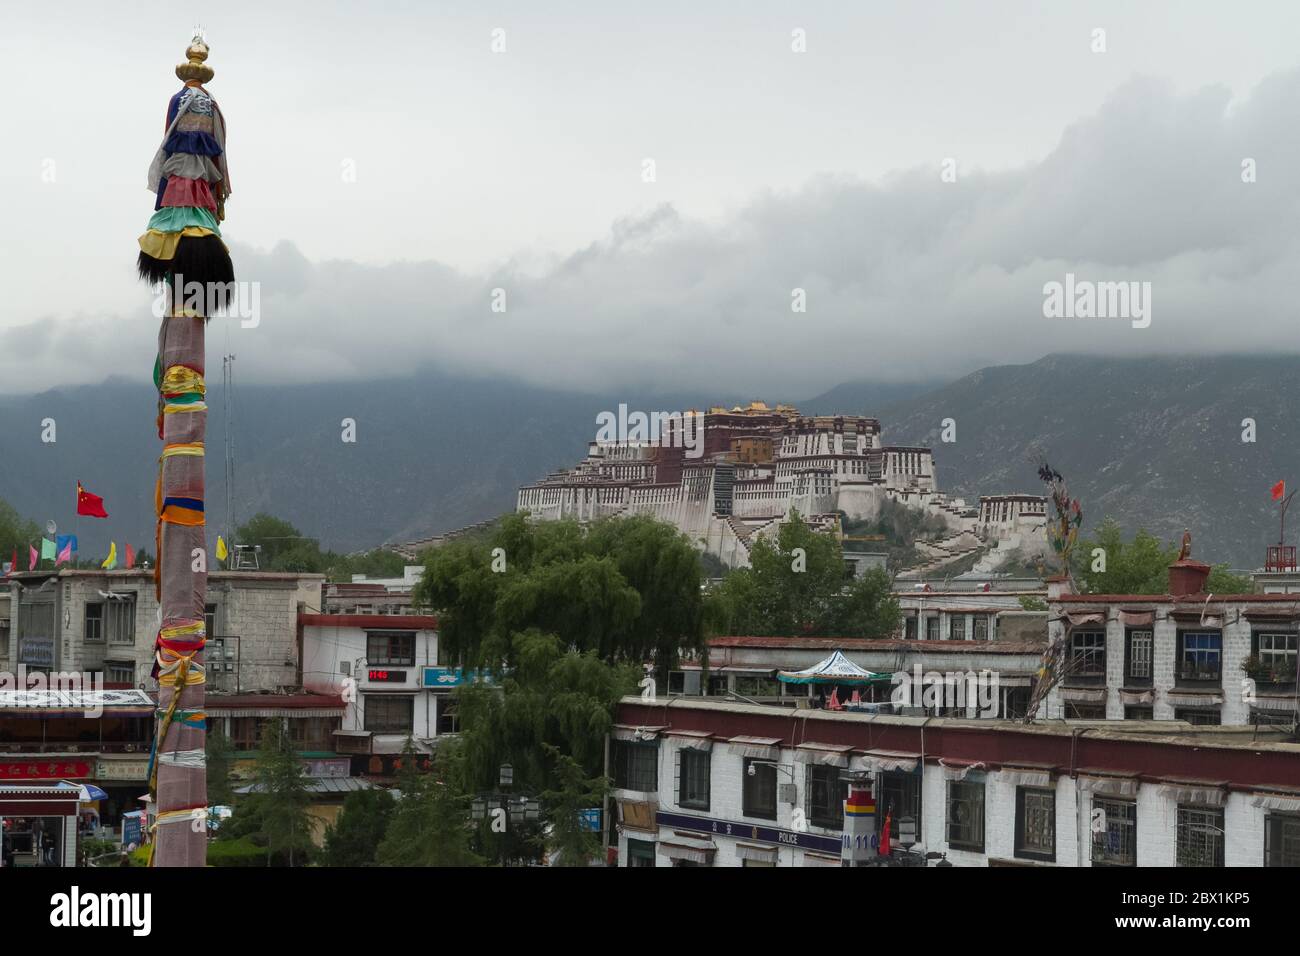 Lhasa, Tibet / China - August 20, 2012: overlooking The Potala Monastery from the rooftop of Jokhang temple Stock Photo